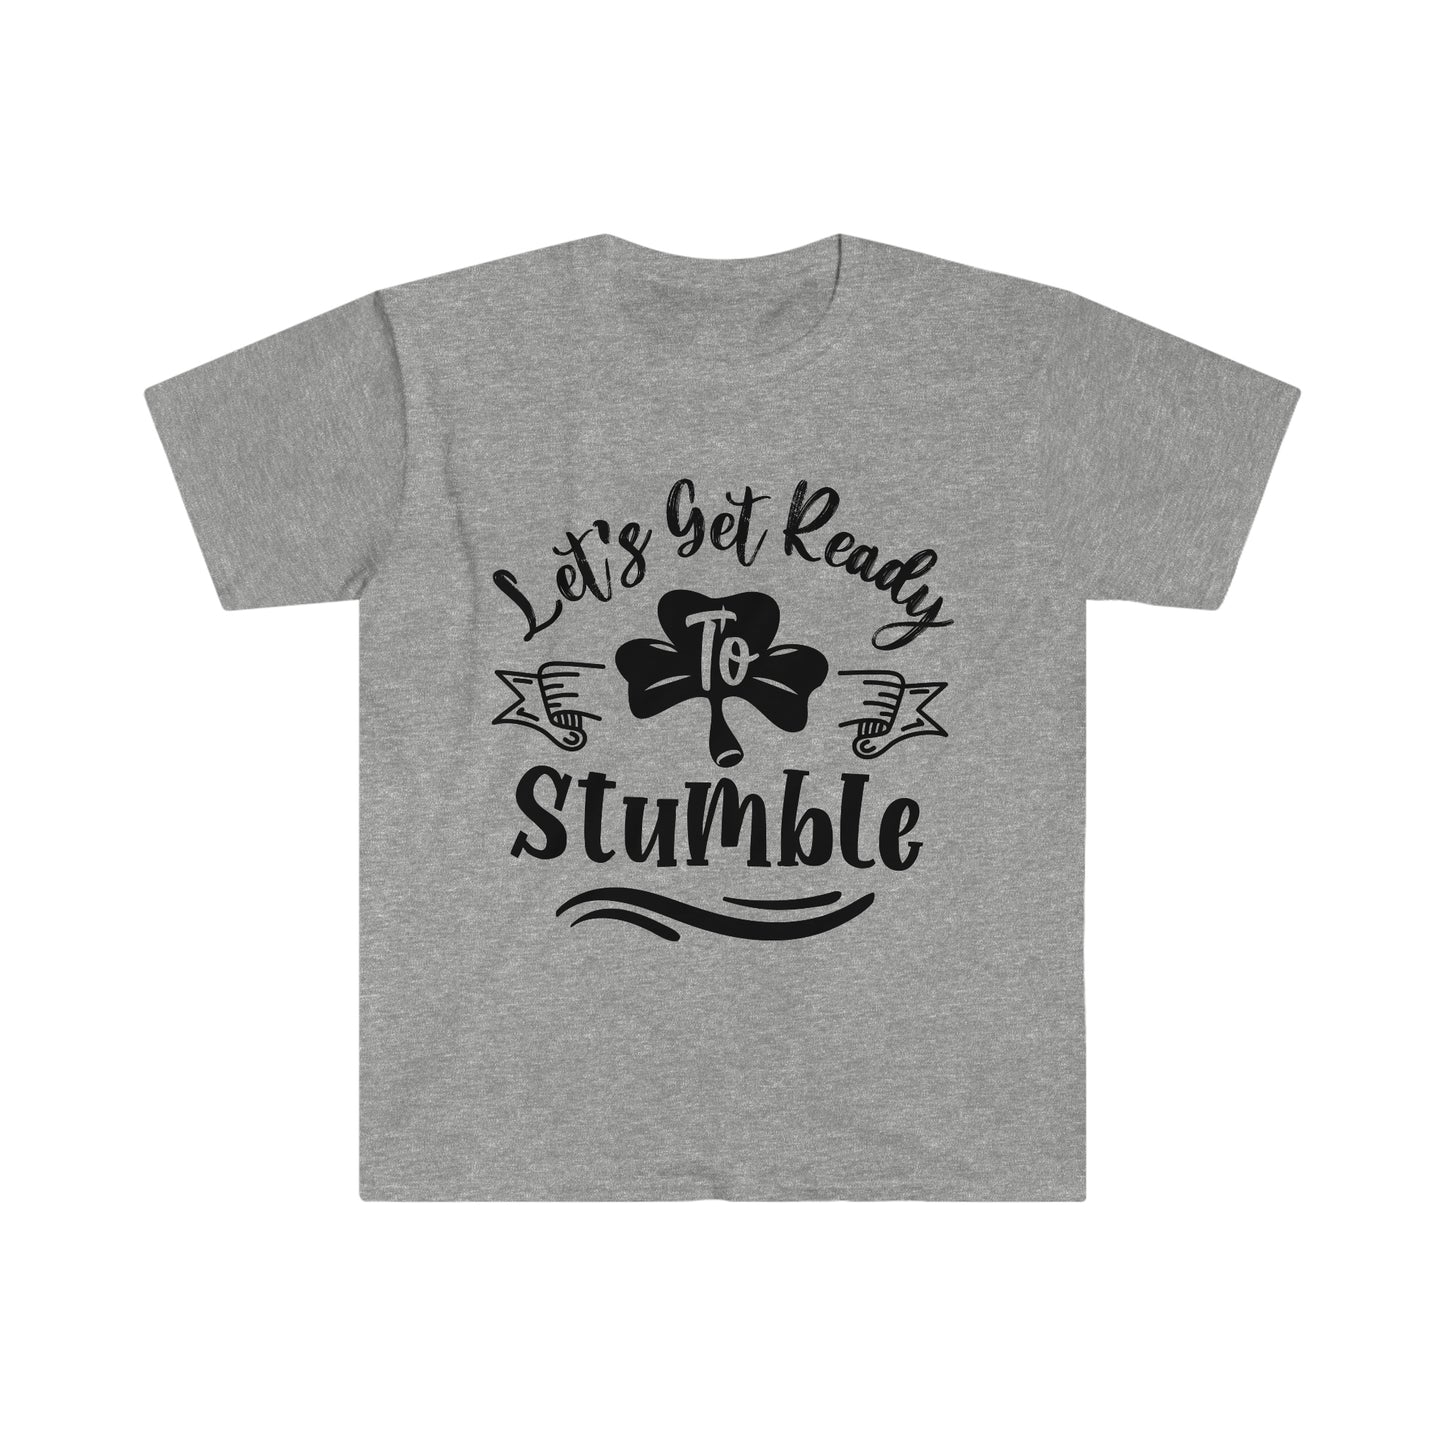 'Let's Get Ready To Stumble' Essential Comfort Tee